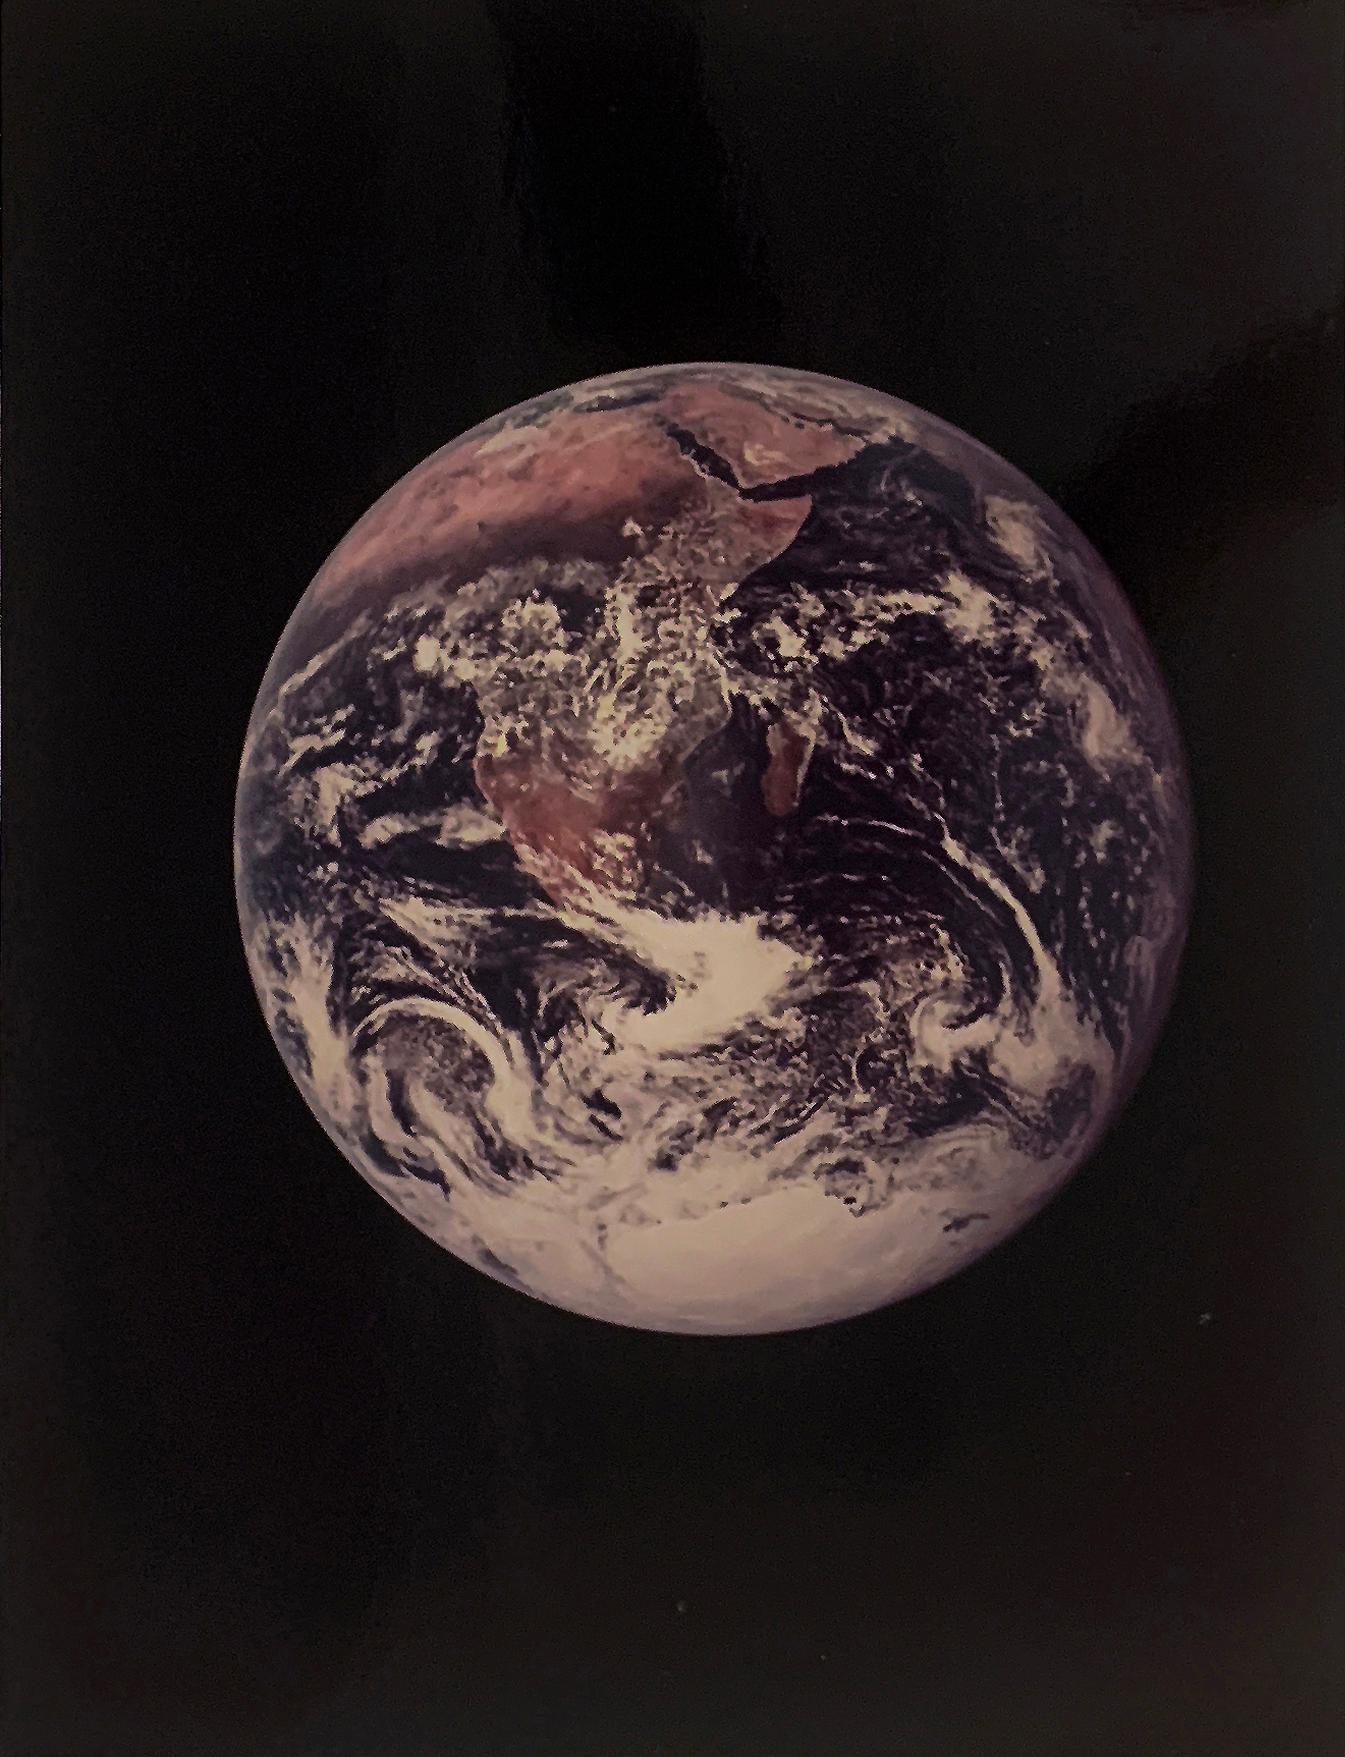 The Blue Marble is the first photograph of the full Earth seen by human eyes, December 7-19, 1972.
The photograph is an iconic image from the Apollo 17 Moon Mission by NASA astronaut Harrison Schmitt. 

Since NASA first released Blue Marble, the